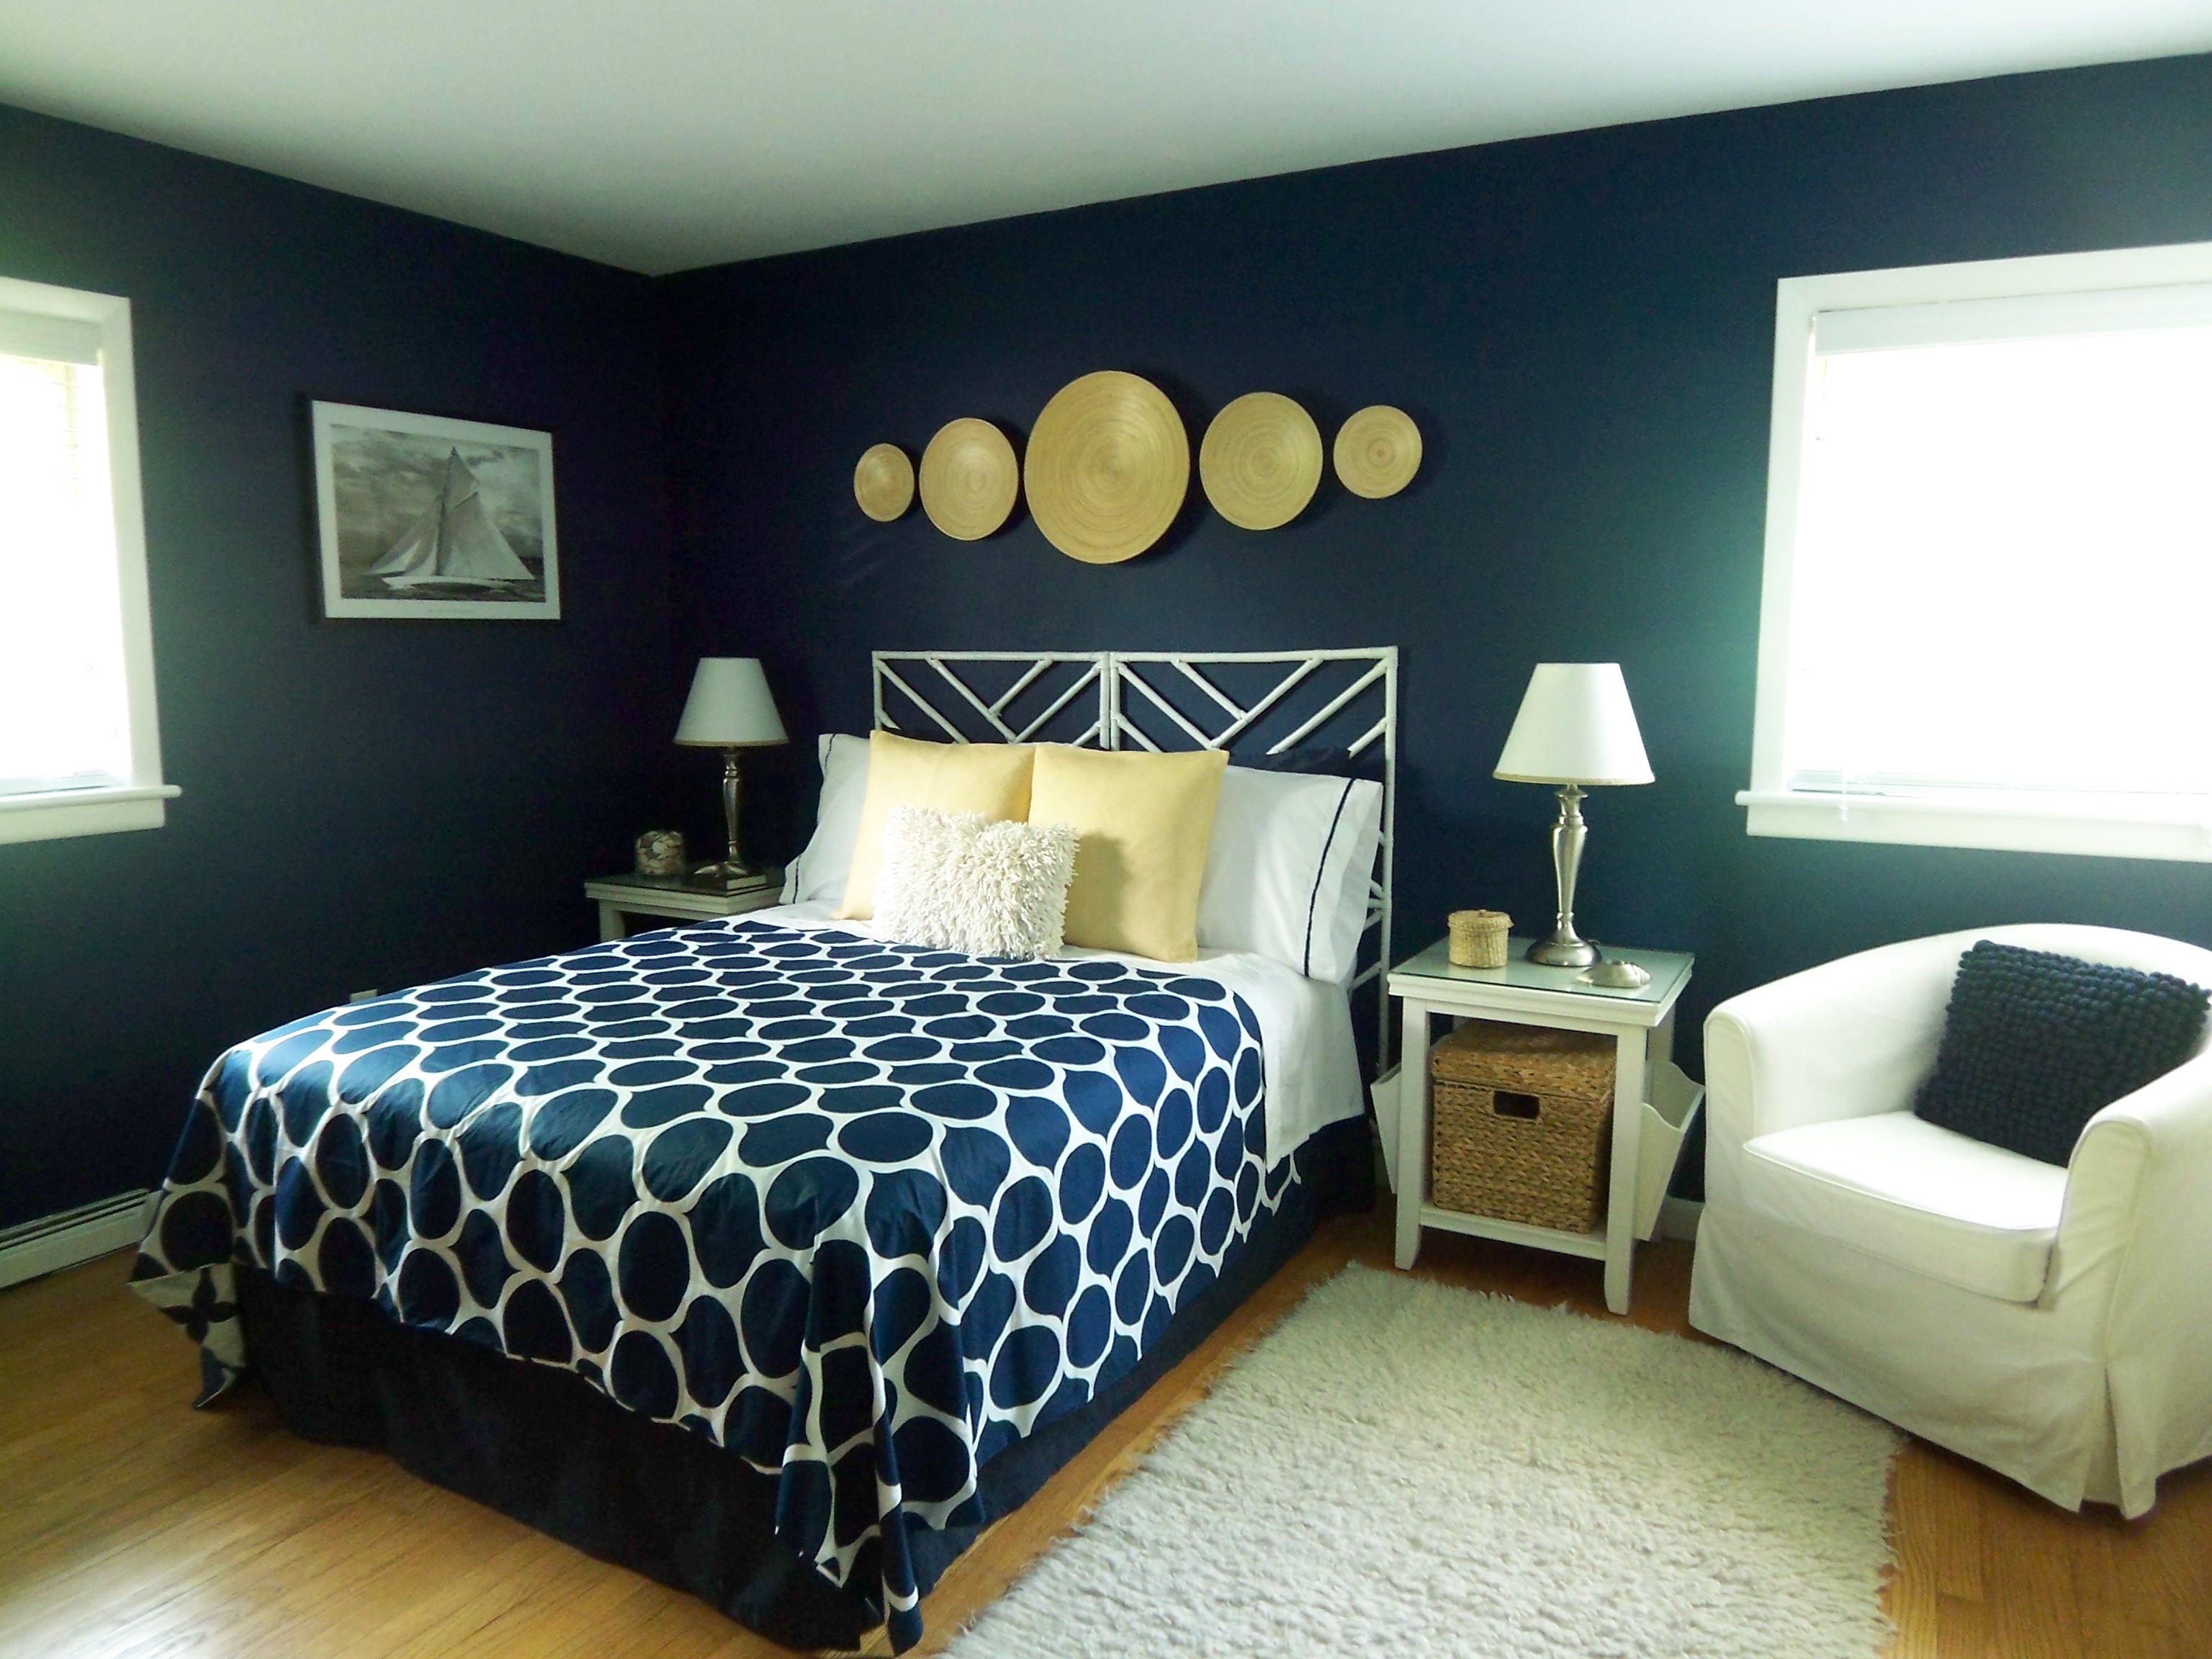 Modern navy blue bedroom as an example of spring home decor trends.